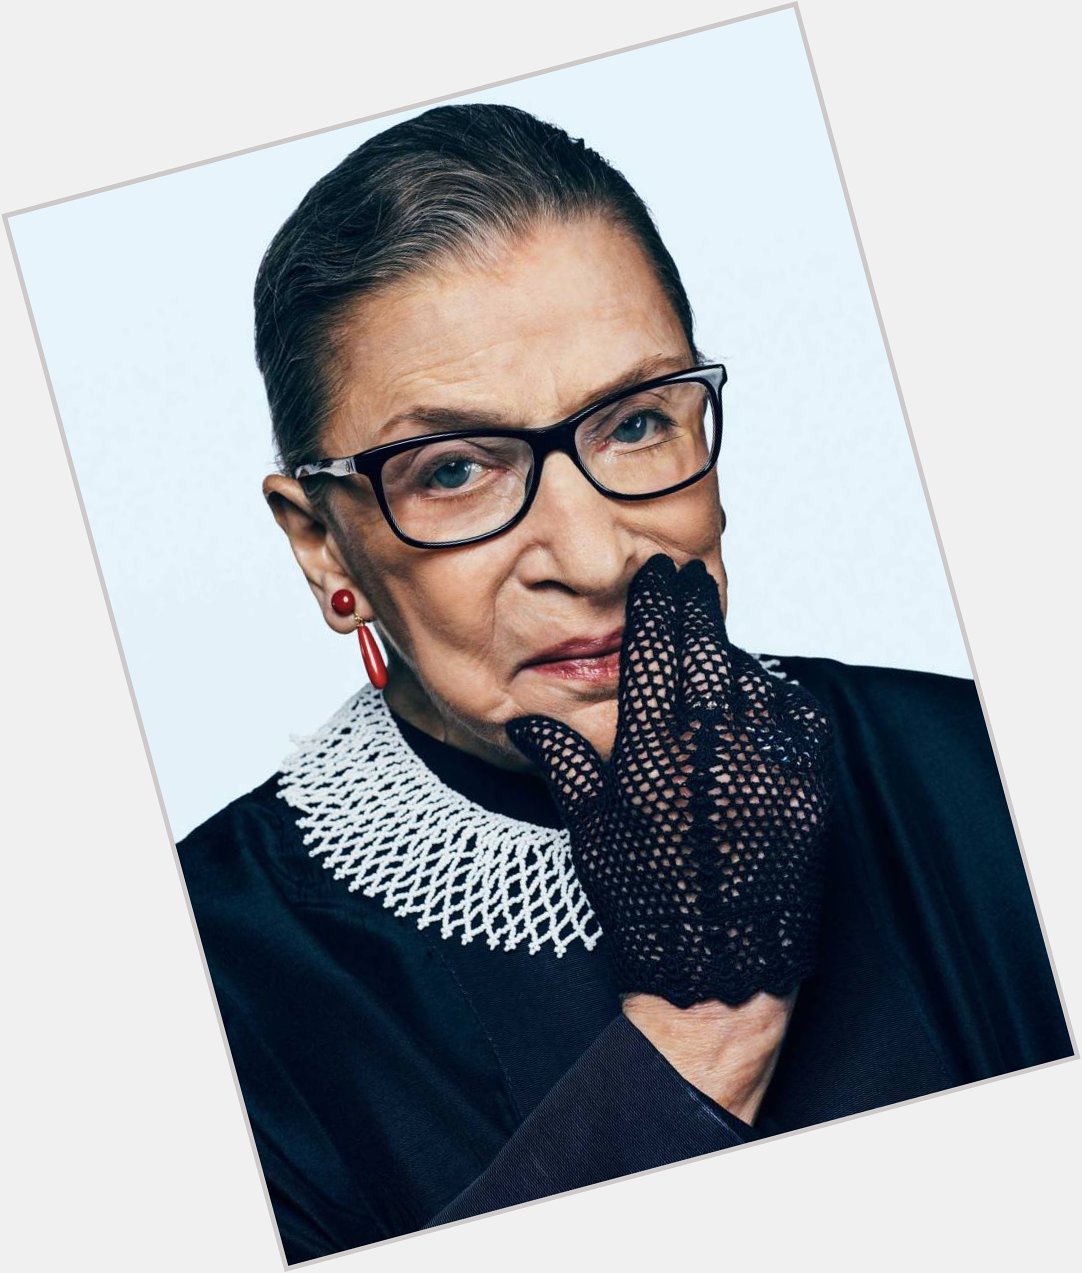 Please join me in wishing a very happy birthday to the indomitable Ruth Bader Ginsburg. 